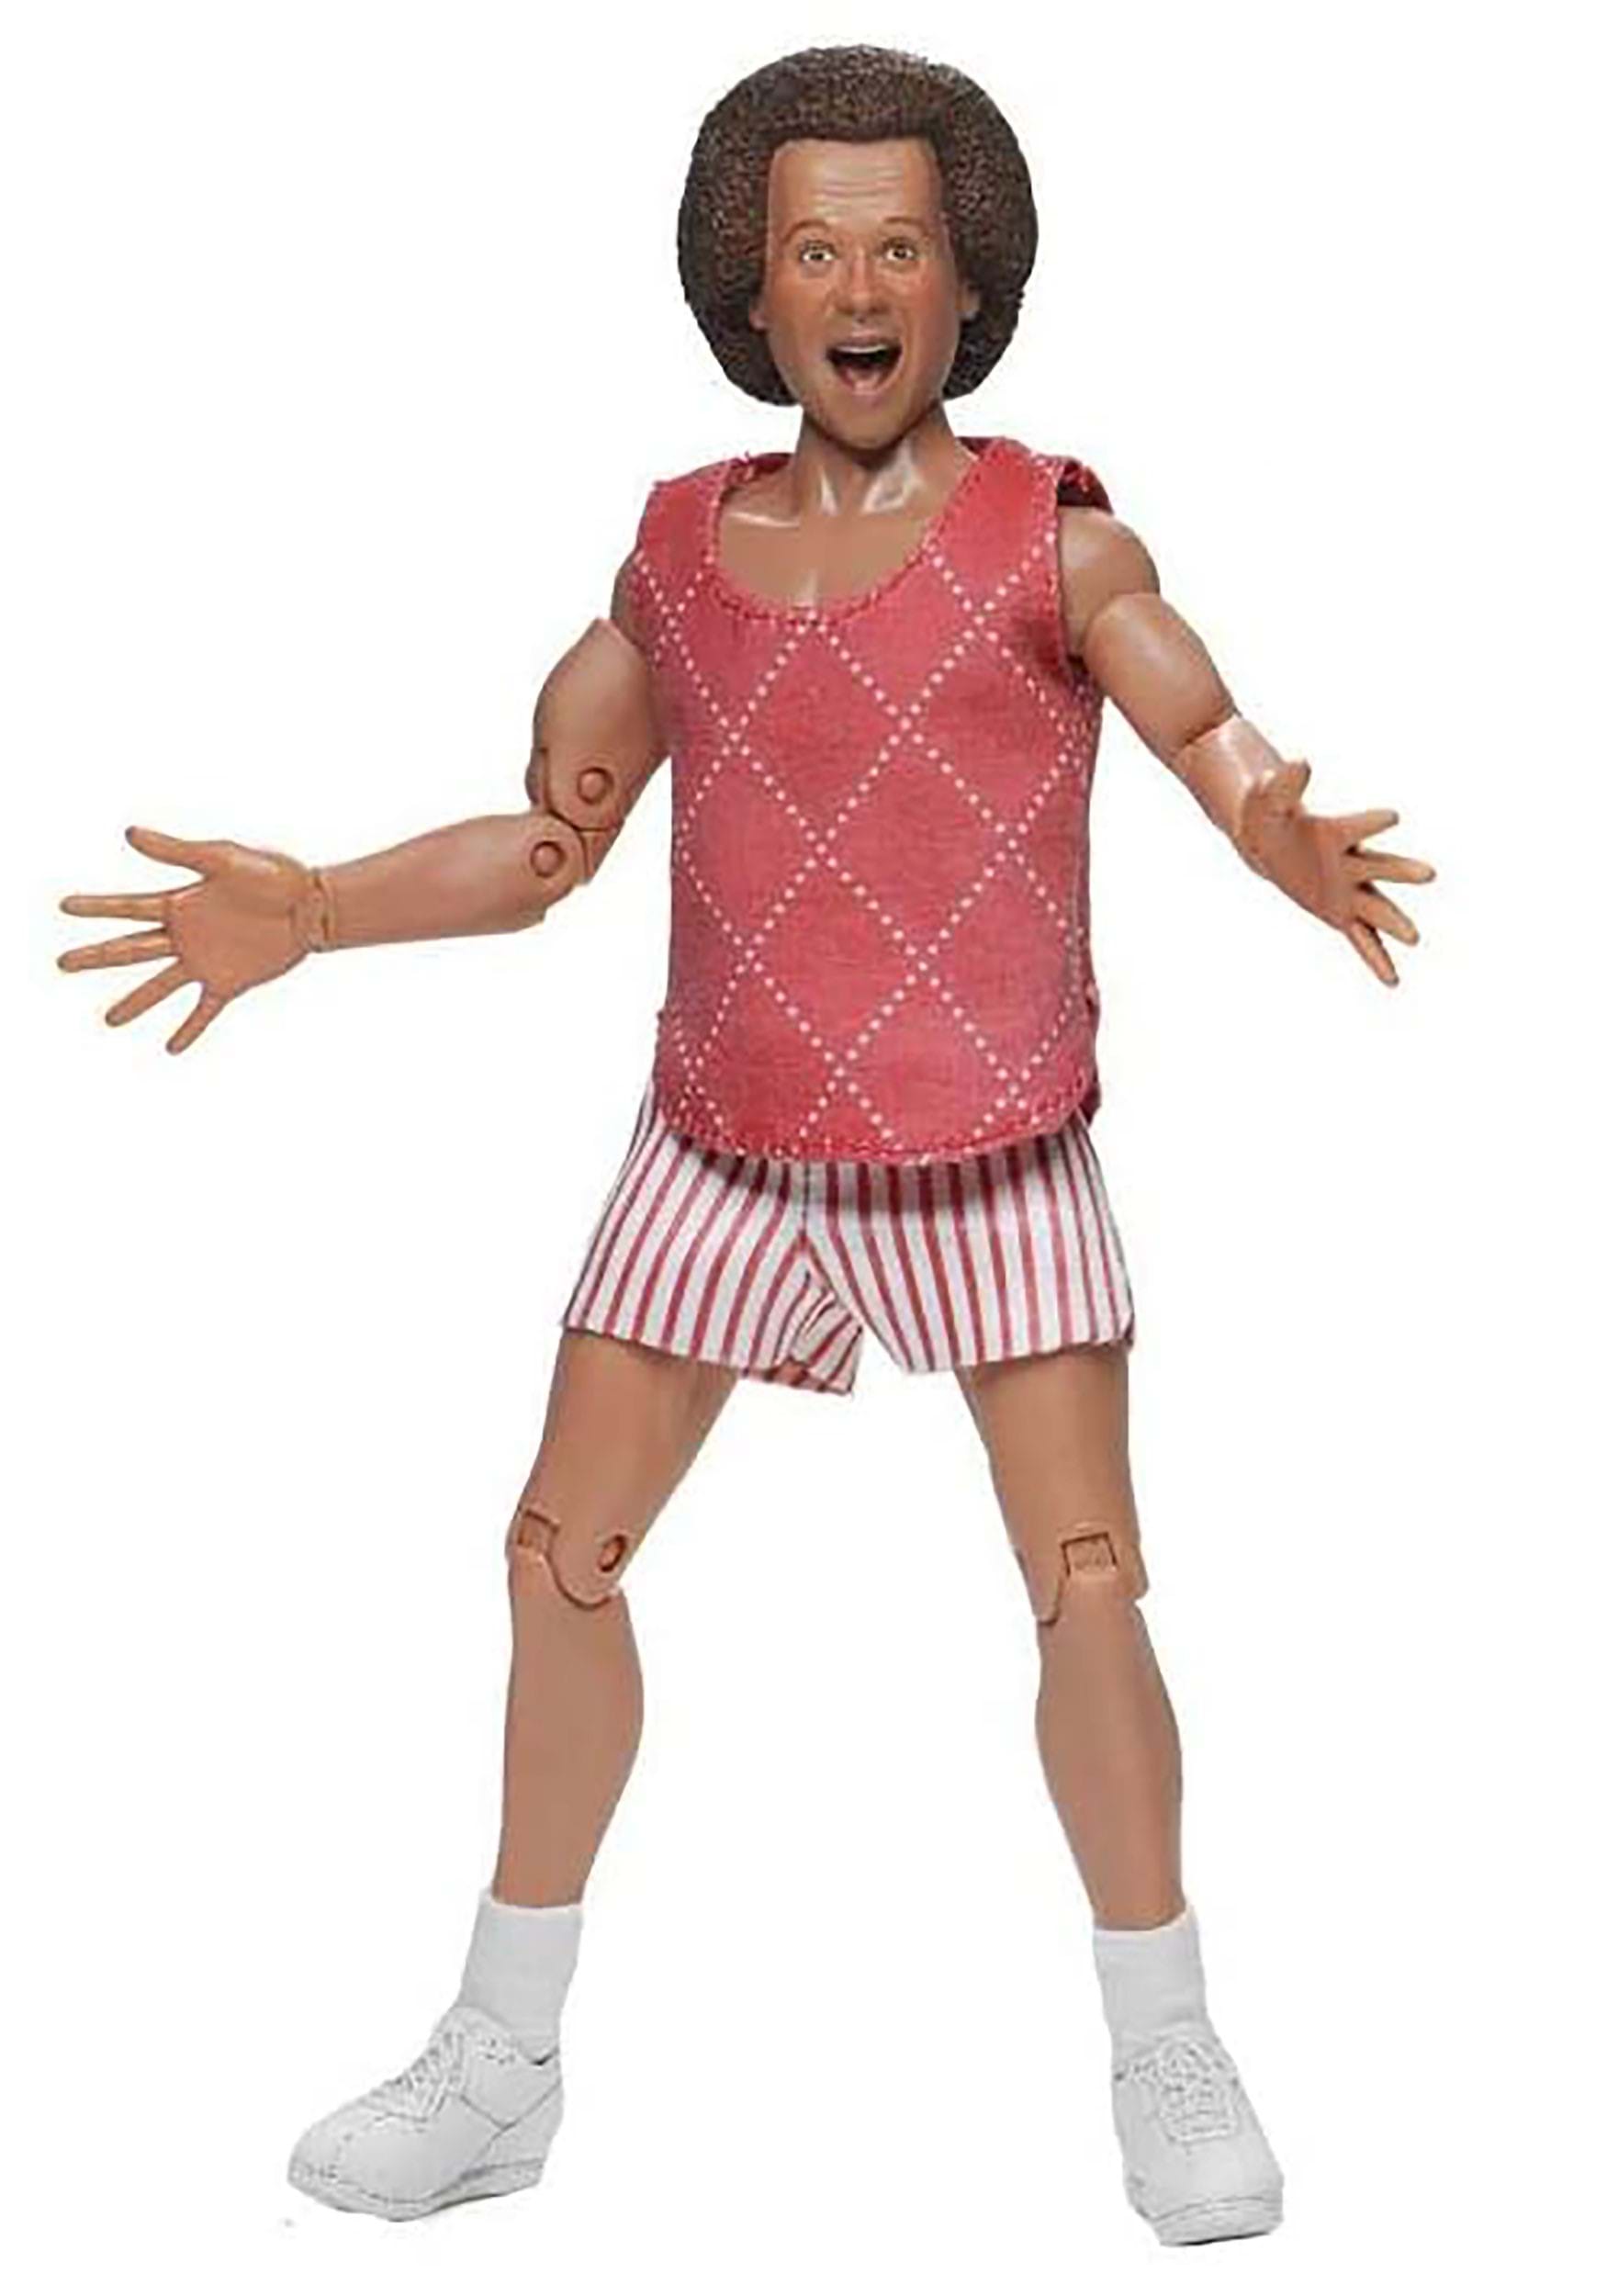 Richard Simmons 8" Clothed Collectible Action Figure